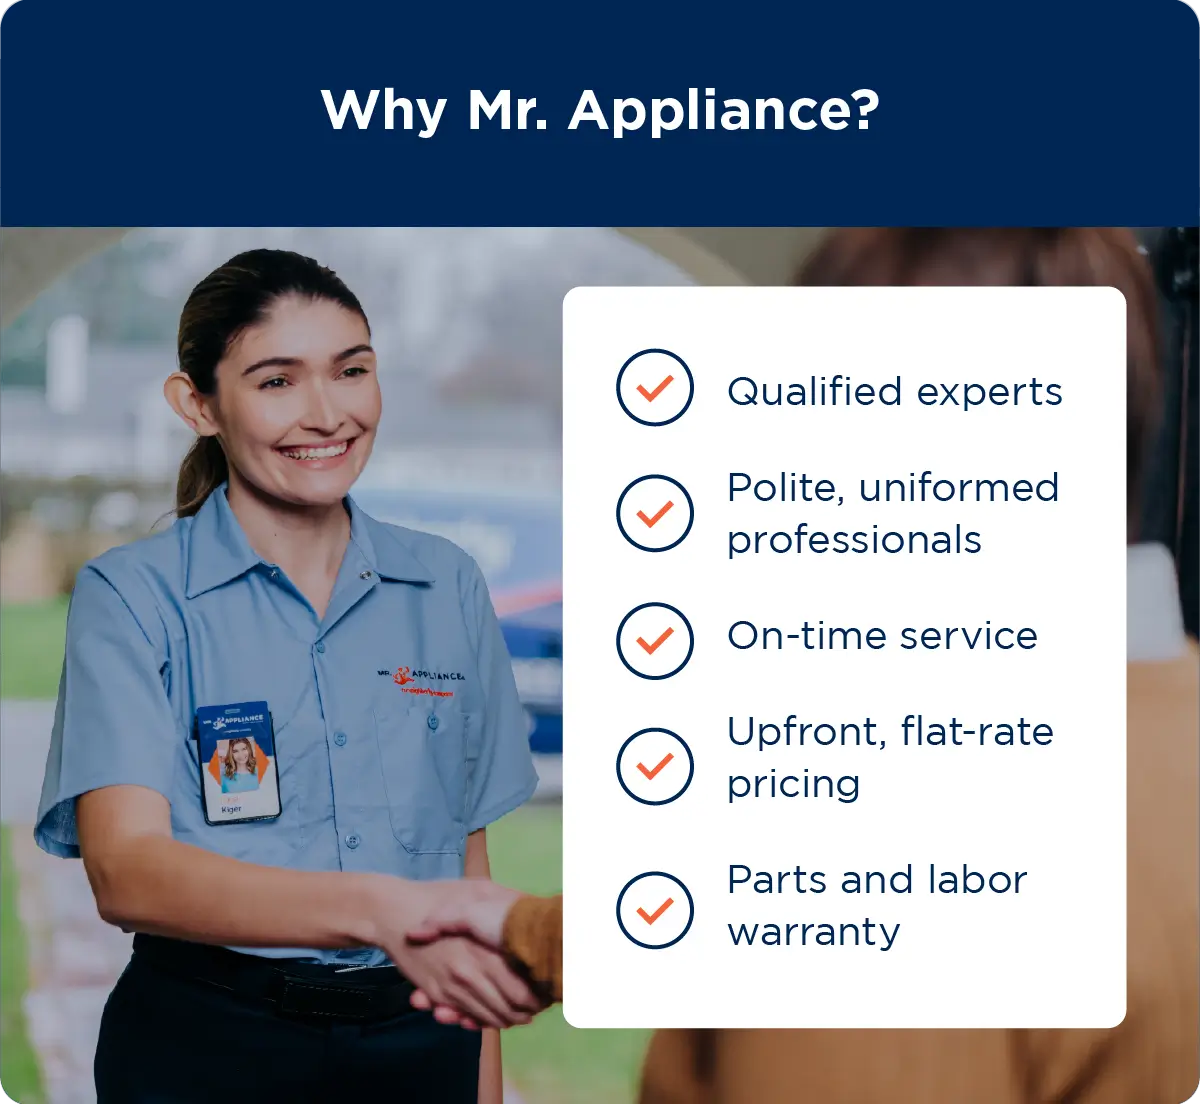 List of reasons why you should hire Mr. Appliance for your ice maker repairs: qualified experts; polite, uniformed professionals; on-time service; upfront, flat-rate pricing; parts and labor warranty; and 25+ years of experience.